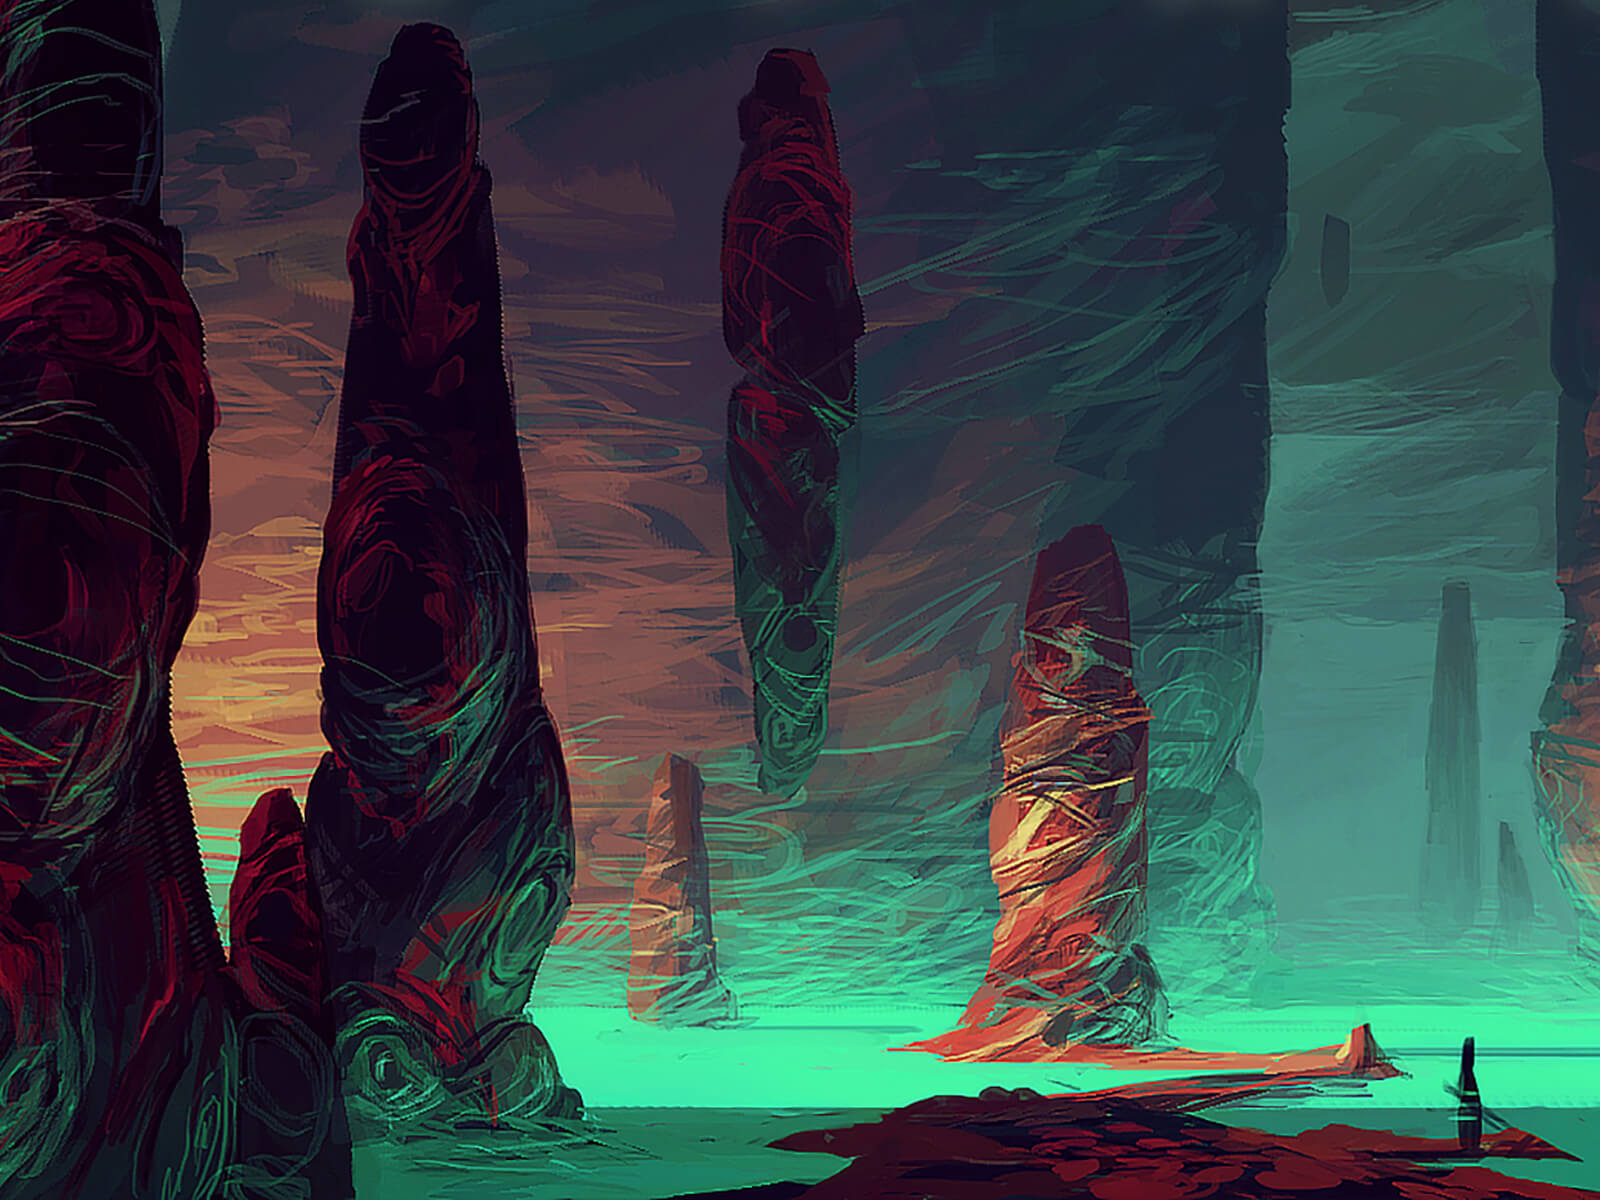 A dark alien environment with colorful rock outcroppings is lit from below by glowing aquamarine body of water.